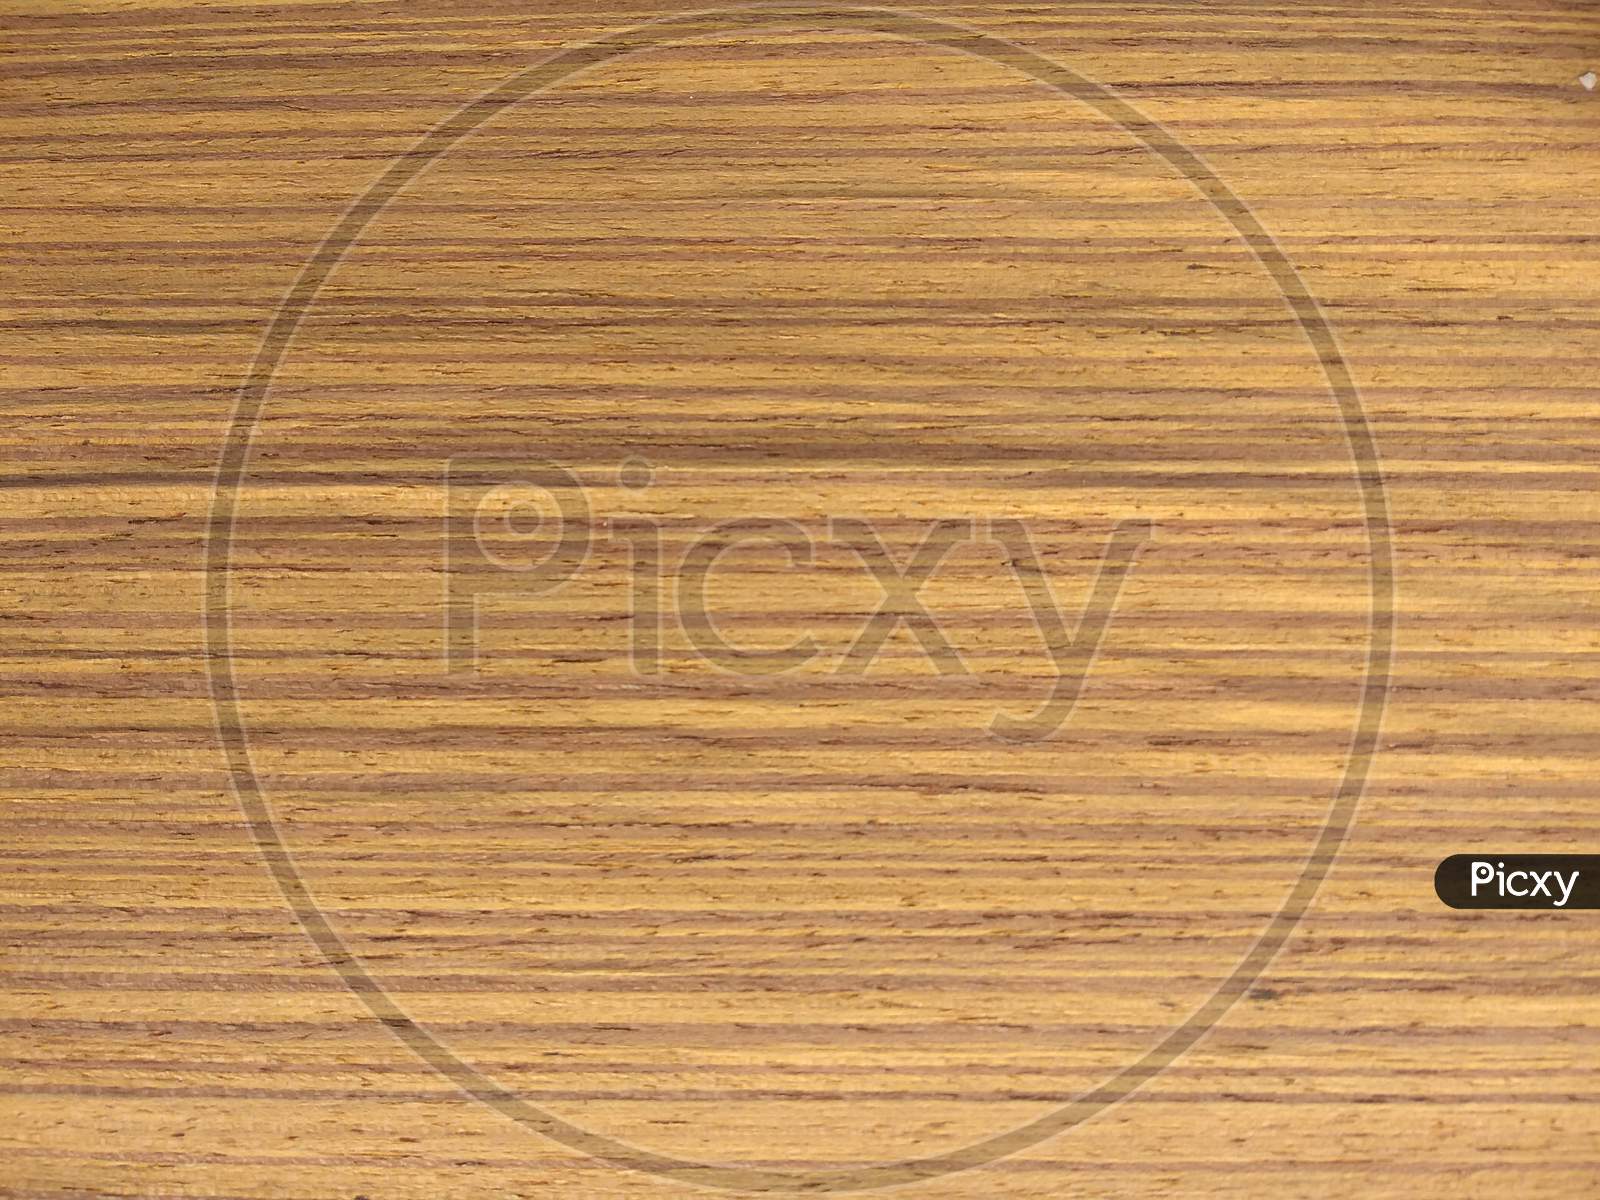 Natural Cp Teak Wood Texture Background. Cp Teak Veneer Surface For Interior And Exterior Manufacturers Use.